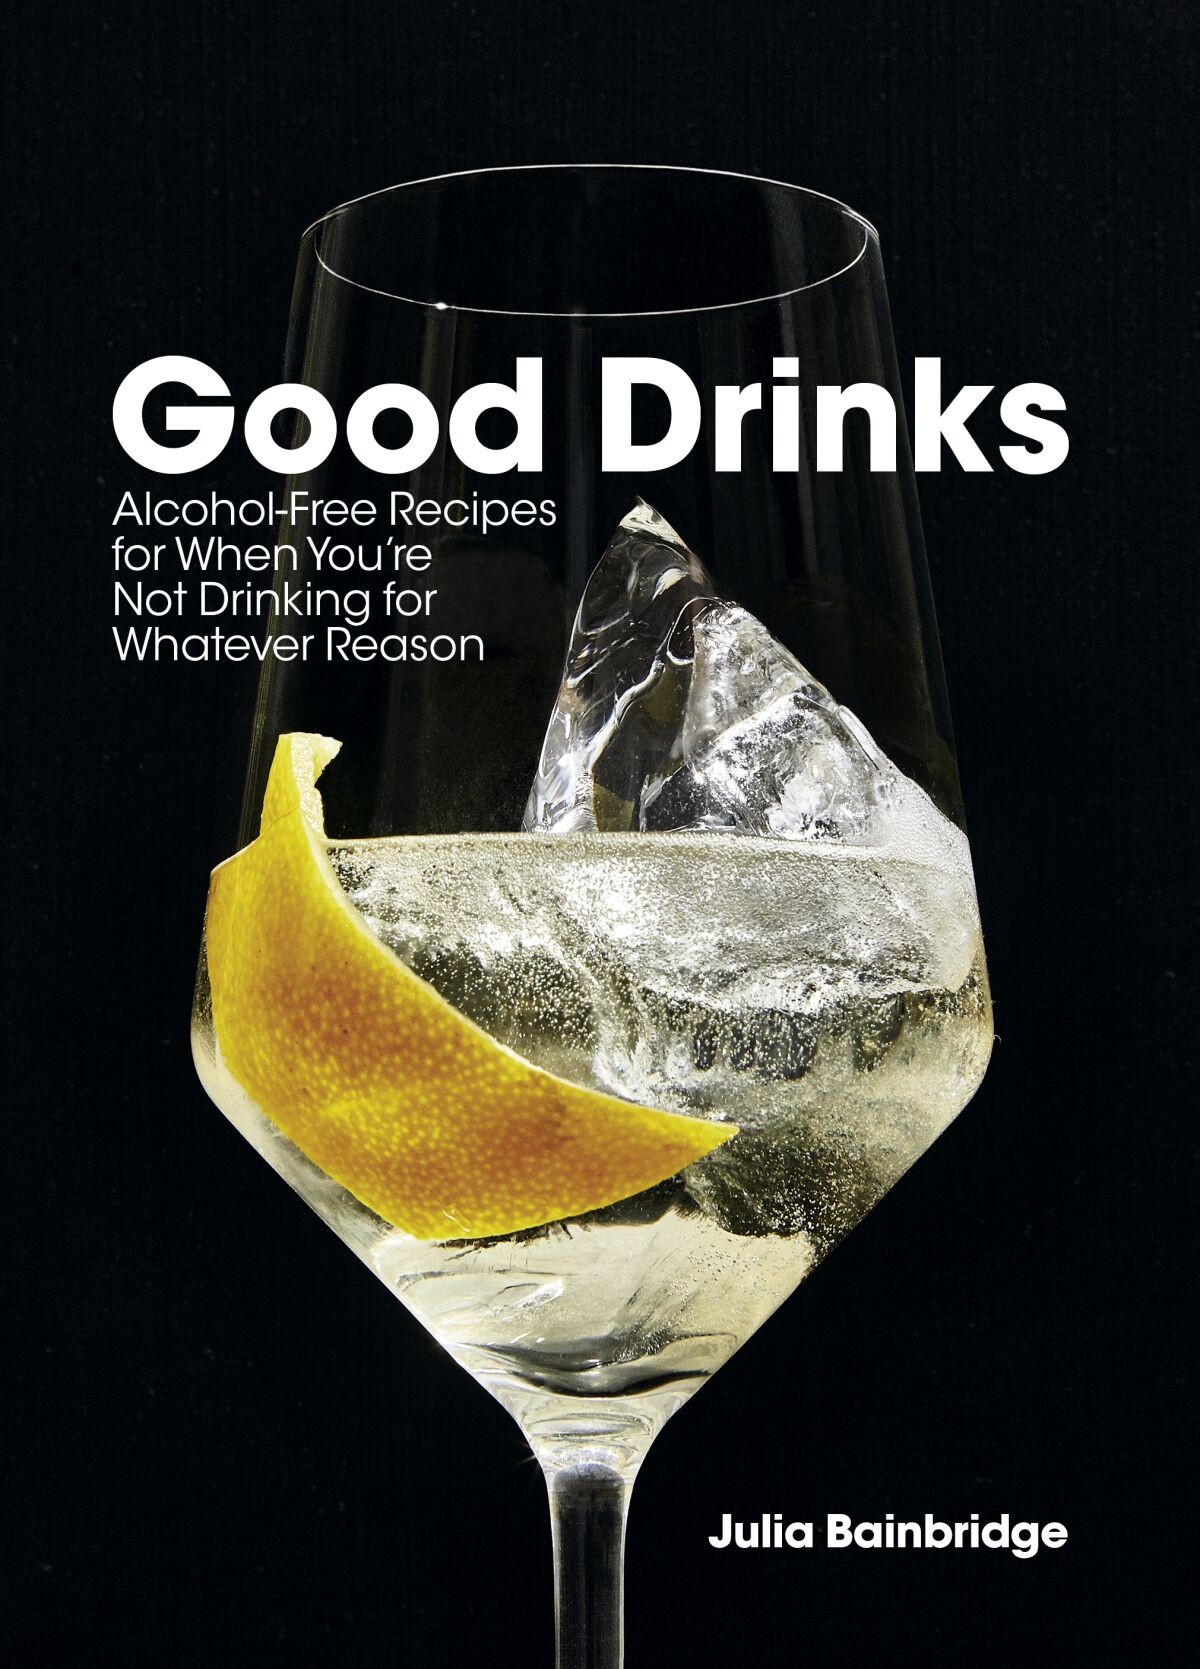 Good Drinks: Alcohol-Free Recipes for When You're Not Drinking for Whatever Reason by Julia Bainbridge